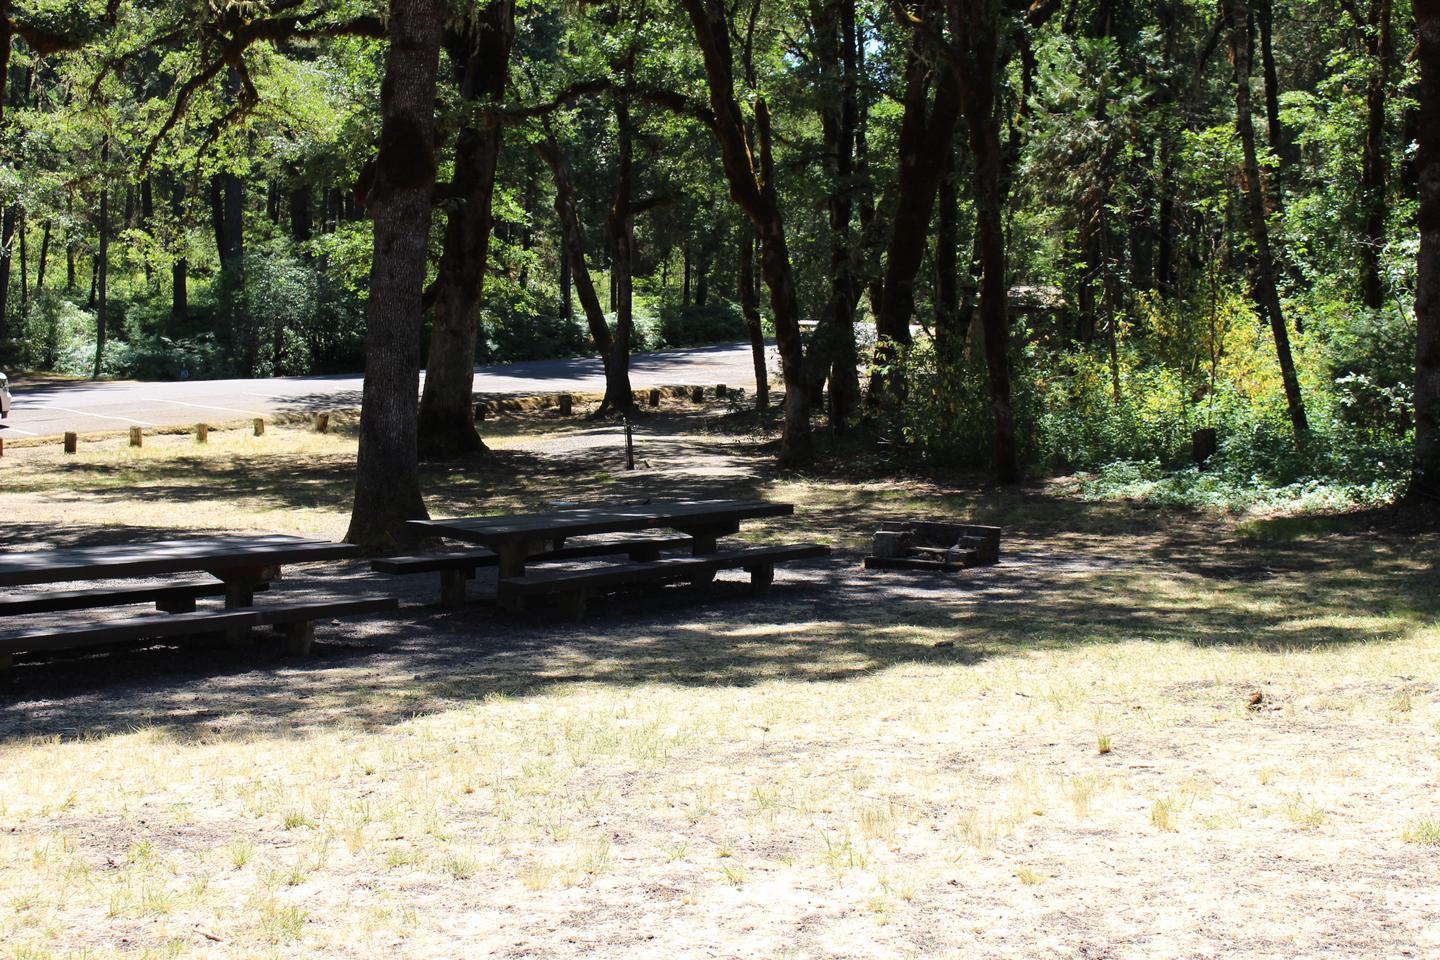 Shaded recreation area with picnic tables and fire ringPicnic area